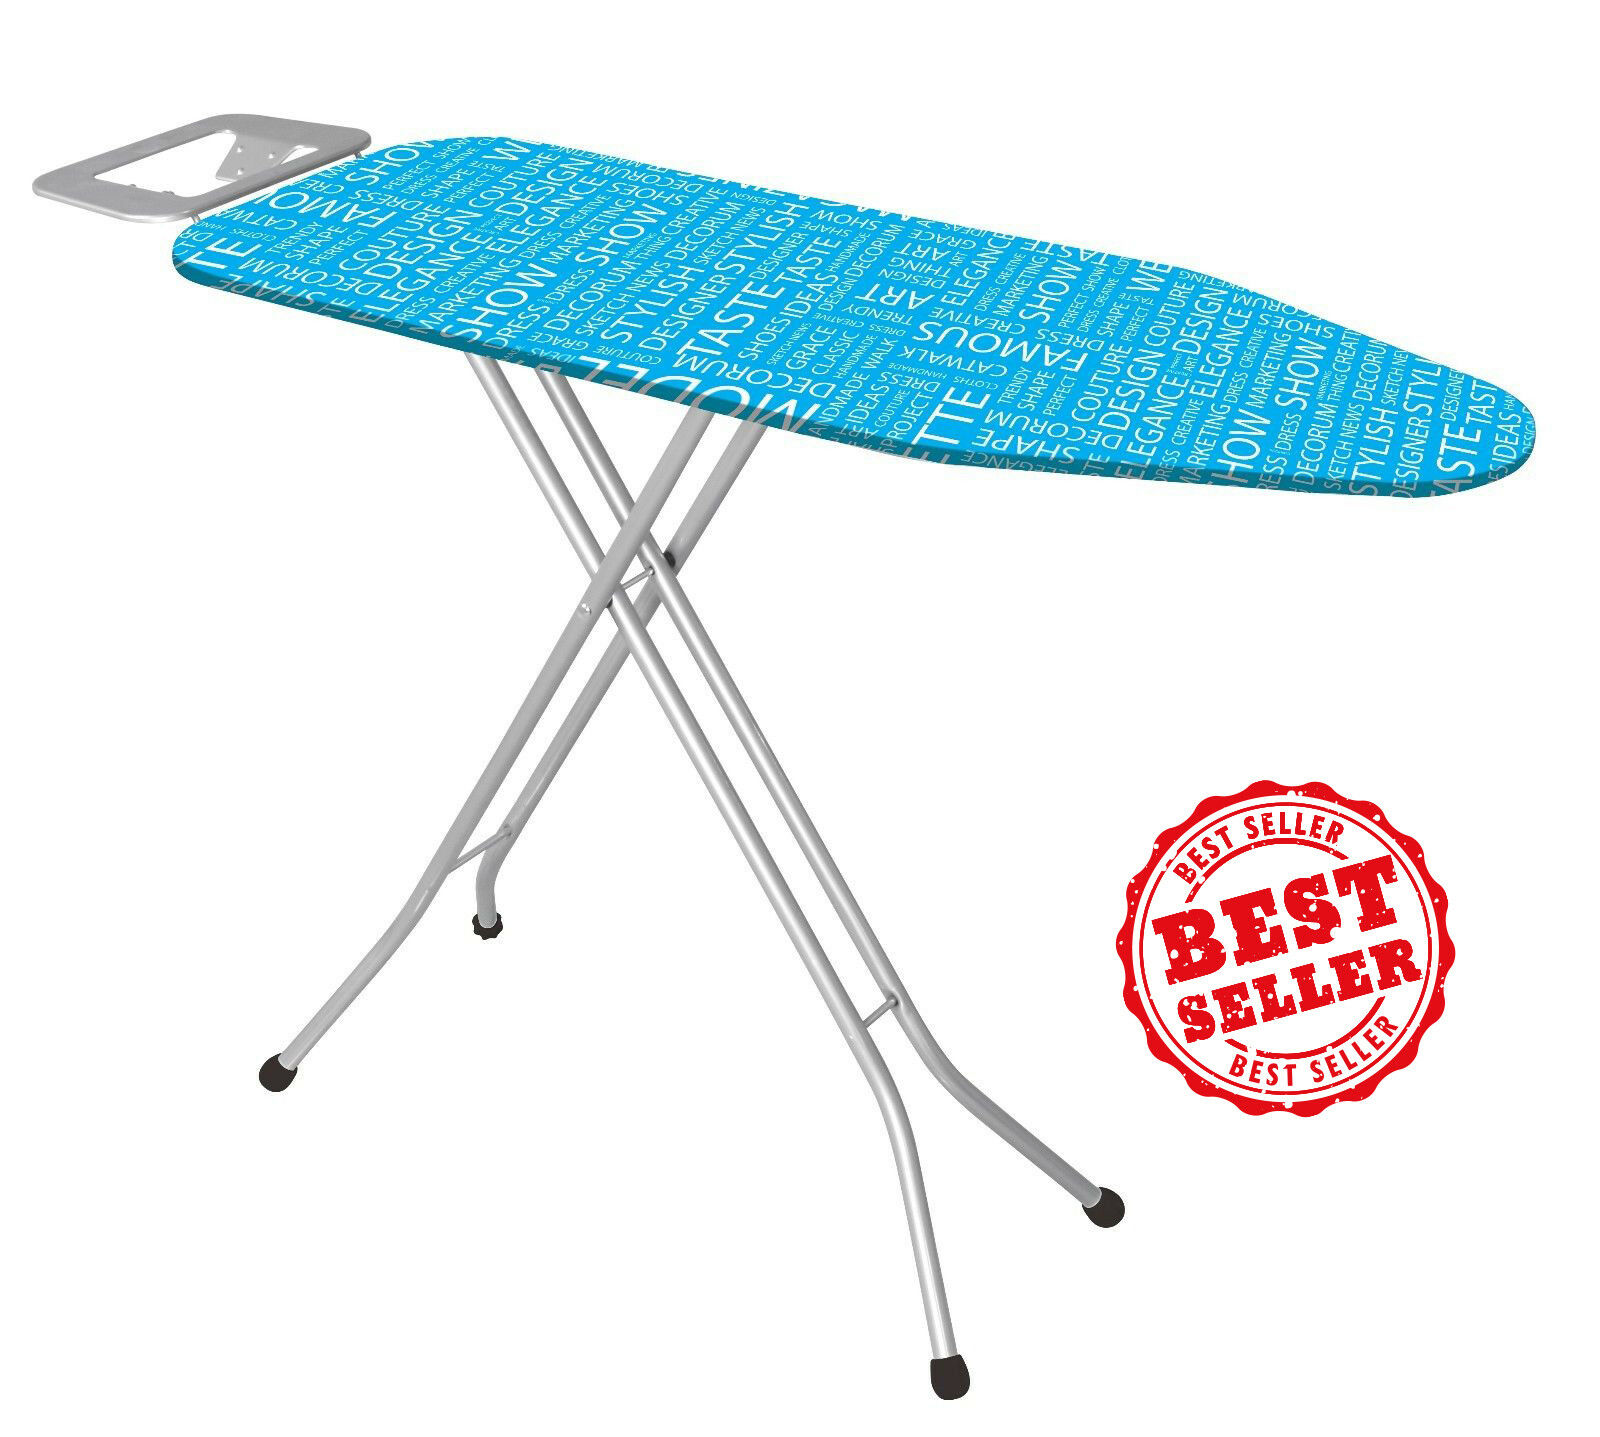 Ironing Board With Iron Rest Large 43 Inch, Made In Turkey, Blue